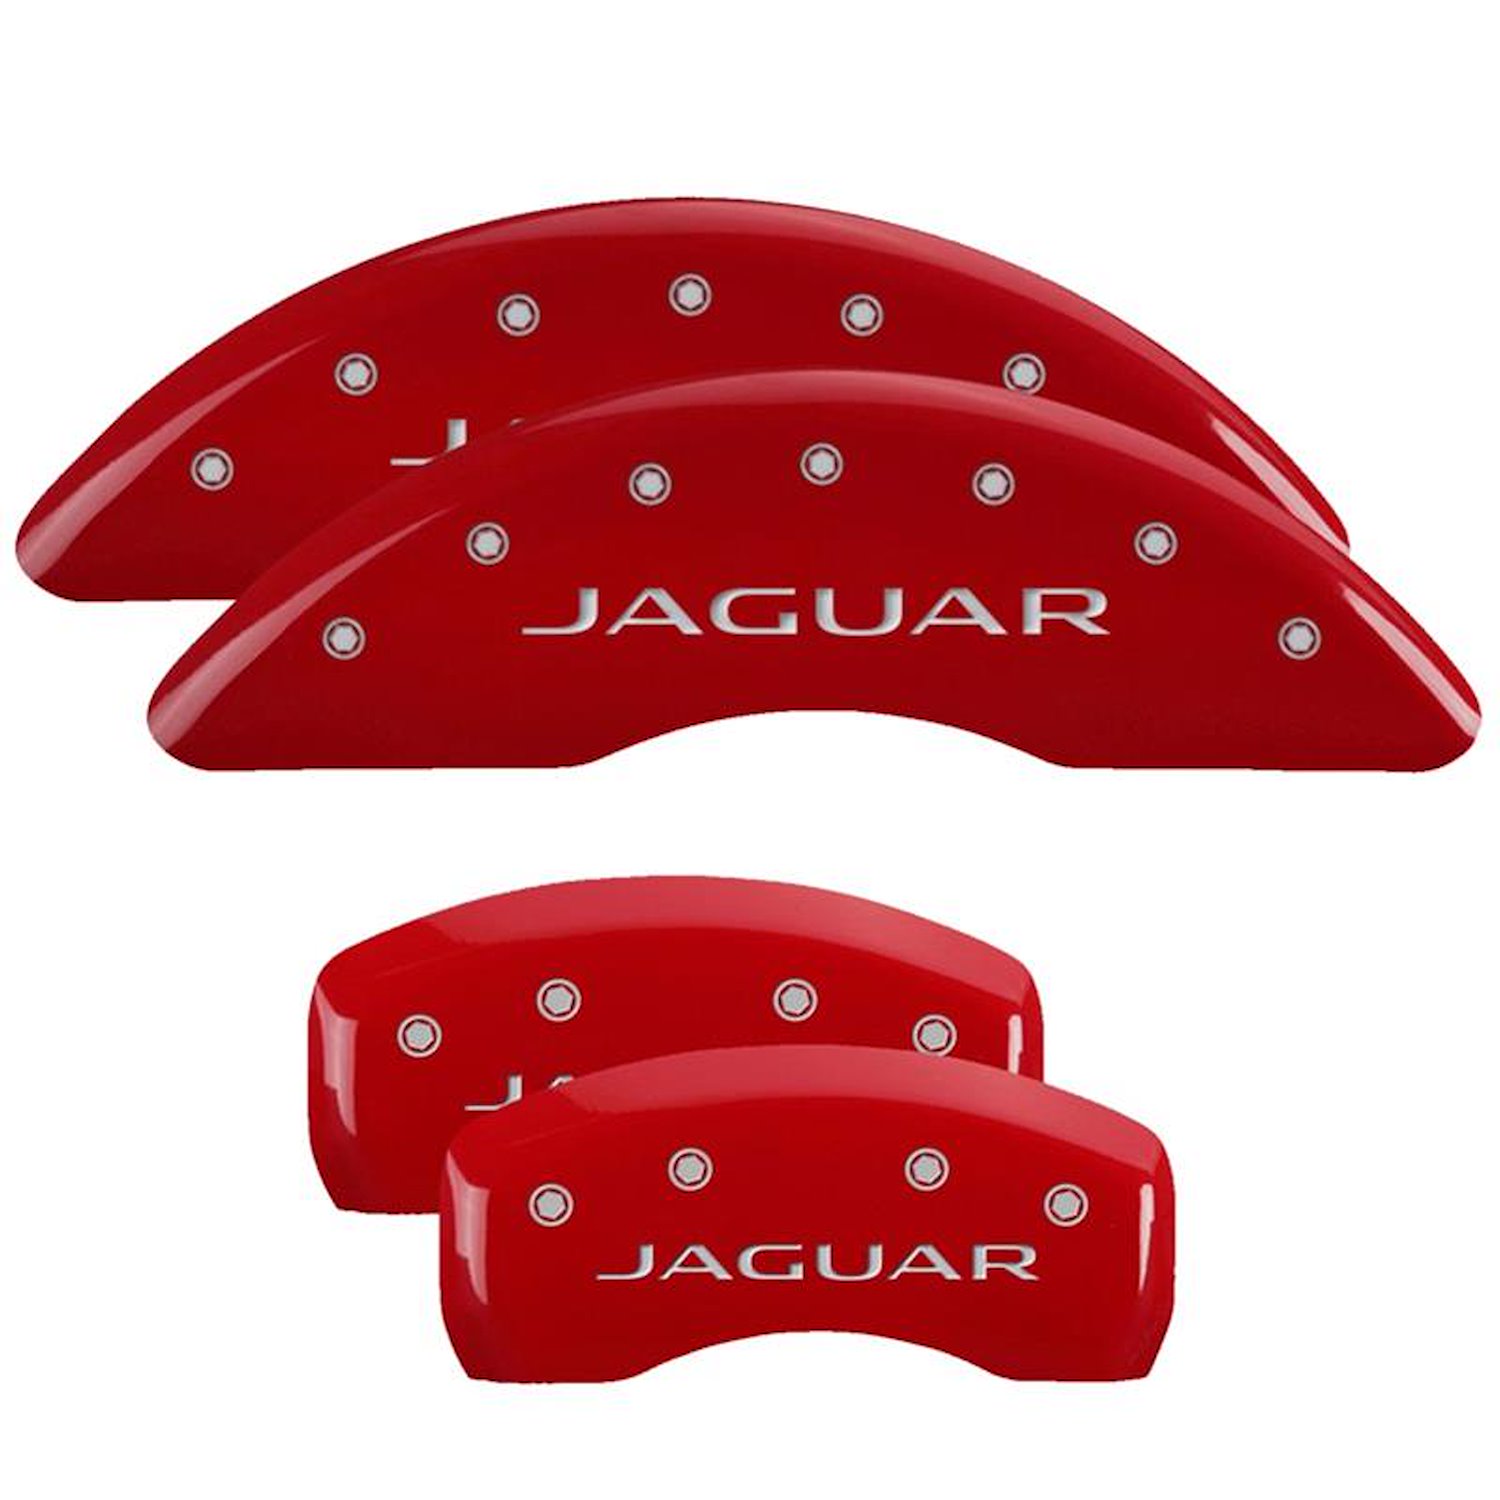 Front and Rear Disk Brake Caliper Covers for Jaguar, Red